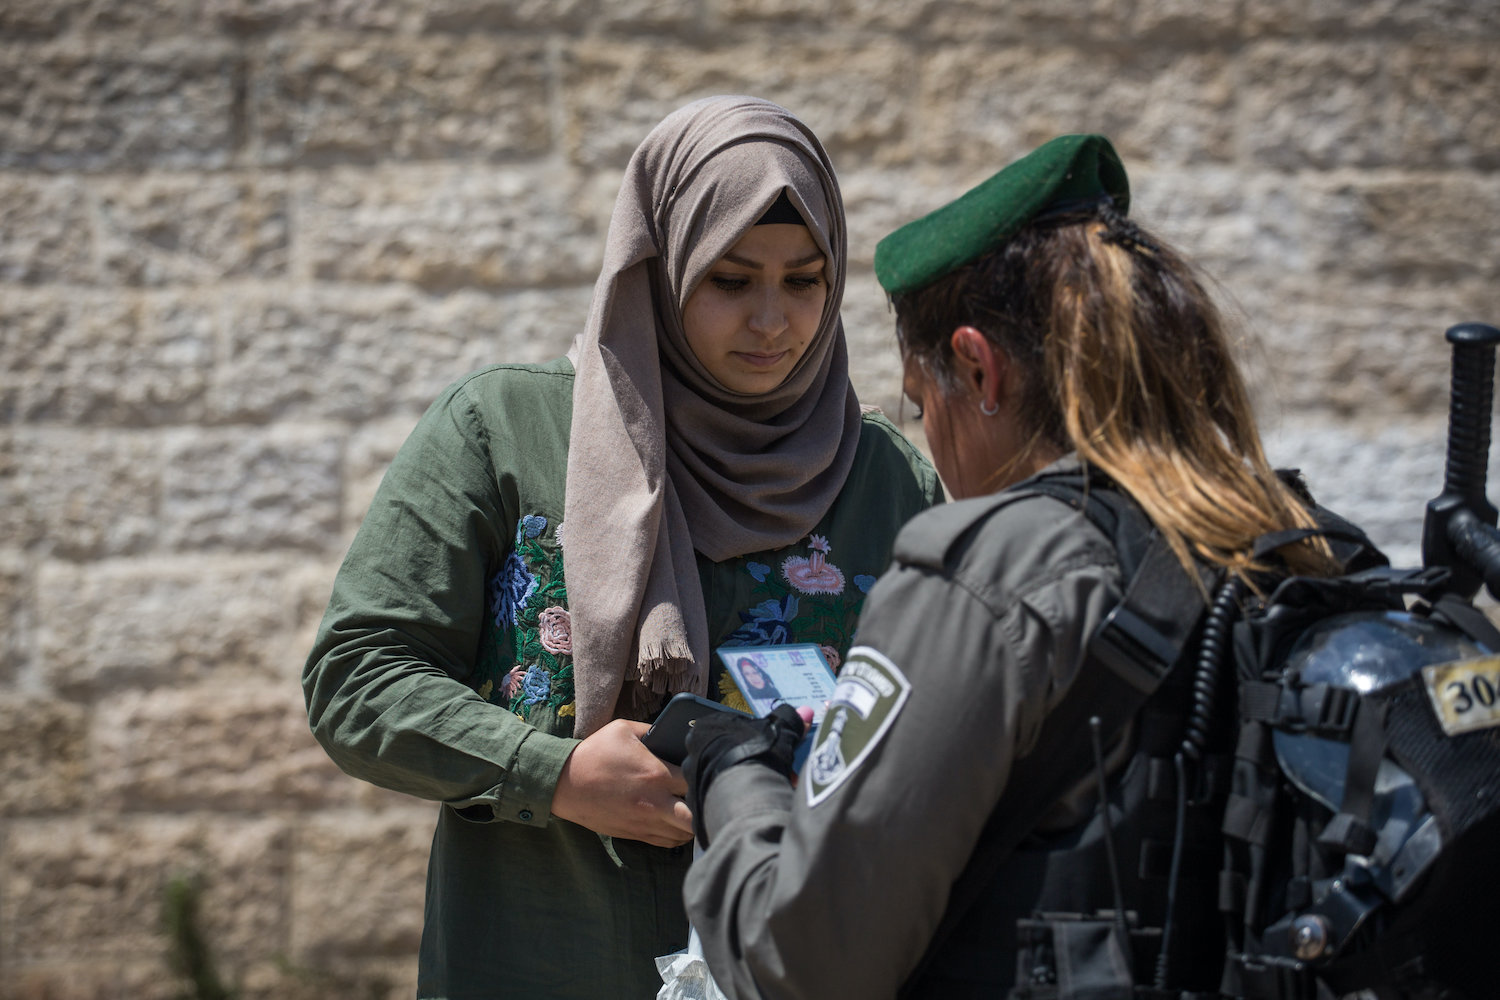 An Israeli Border Police officer checks the ID card of a Palestinian woman in front of Damascus Gate in Jerusalem's Old City, on June 18, 2017. (Hadas Parush/Flash90)